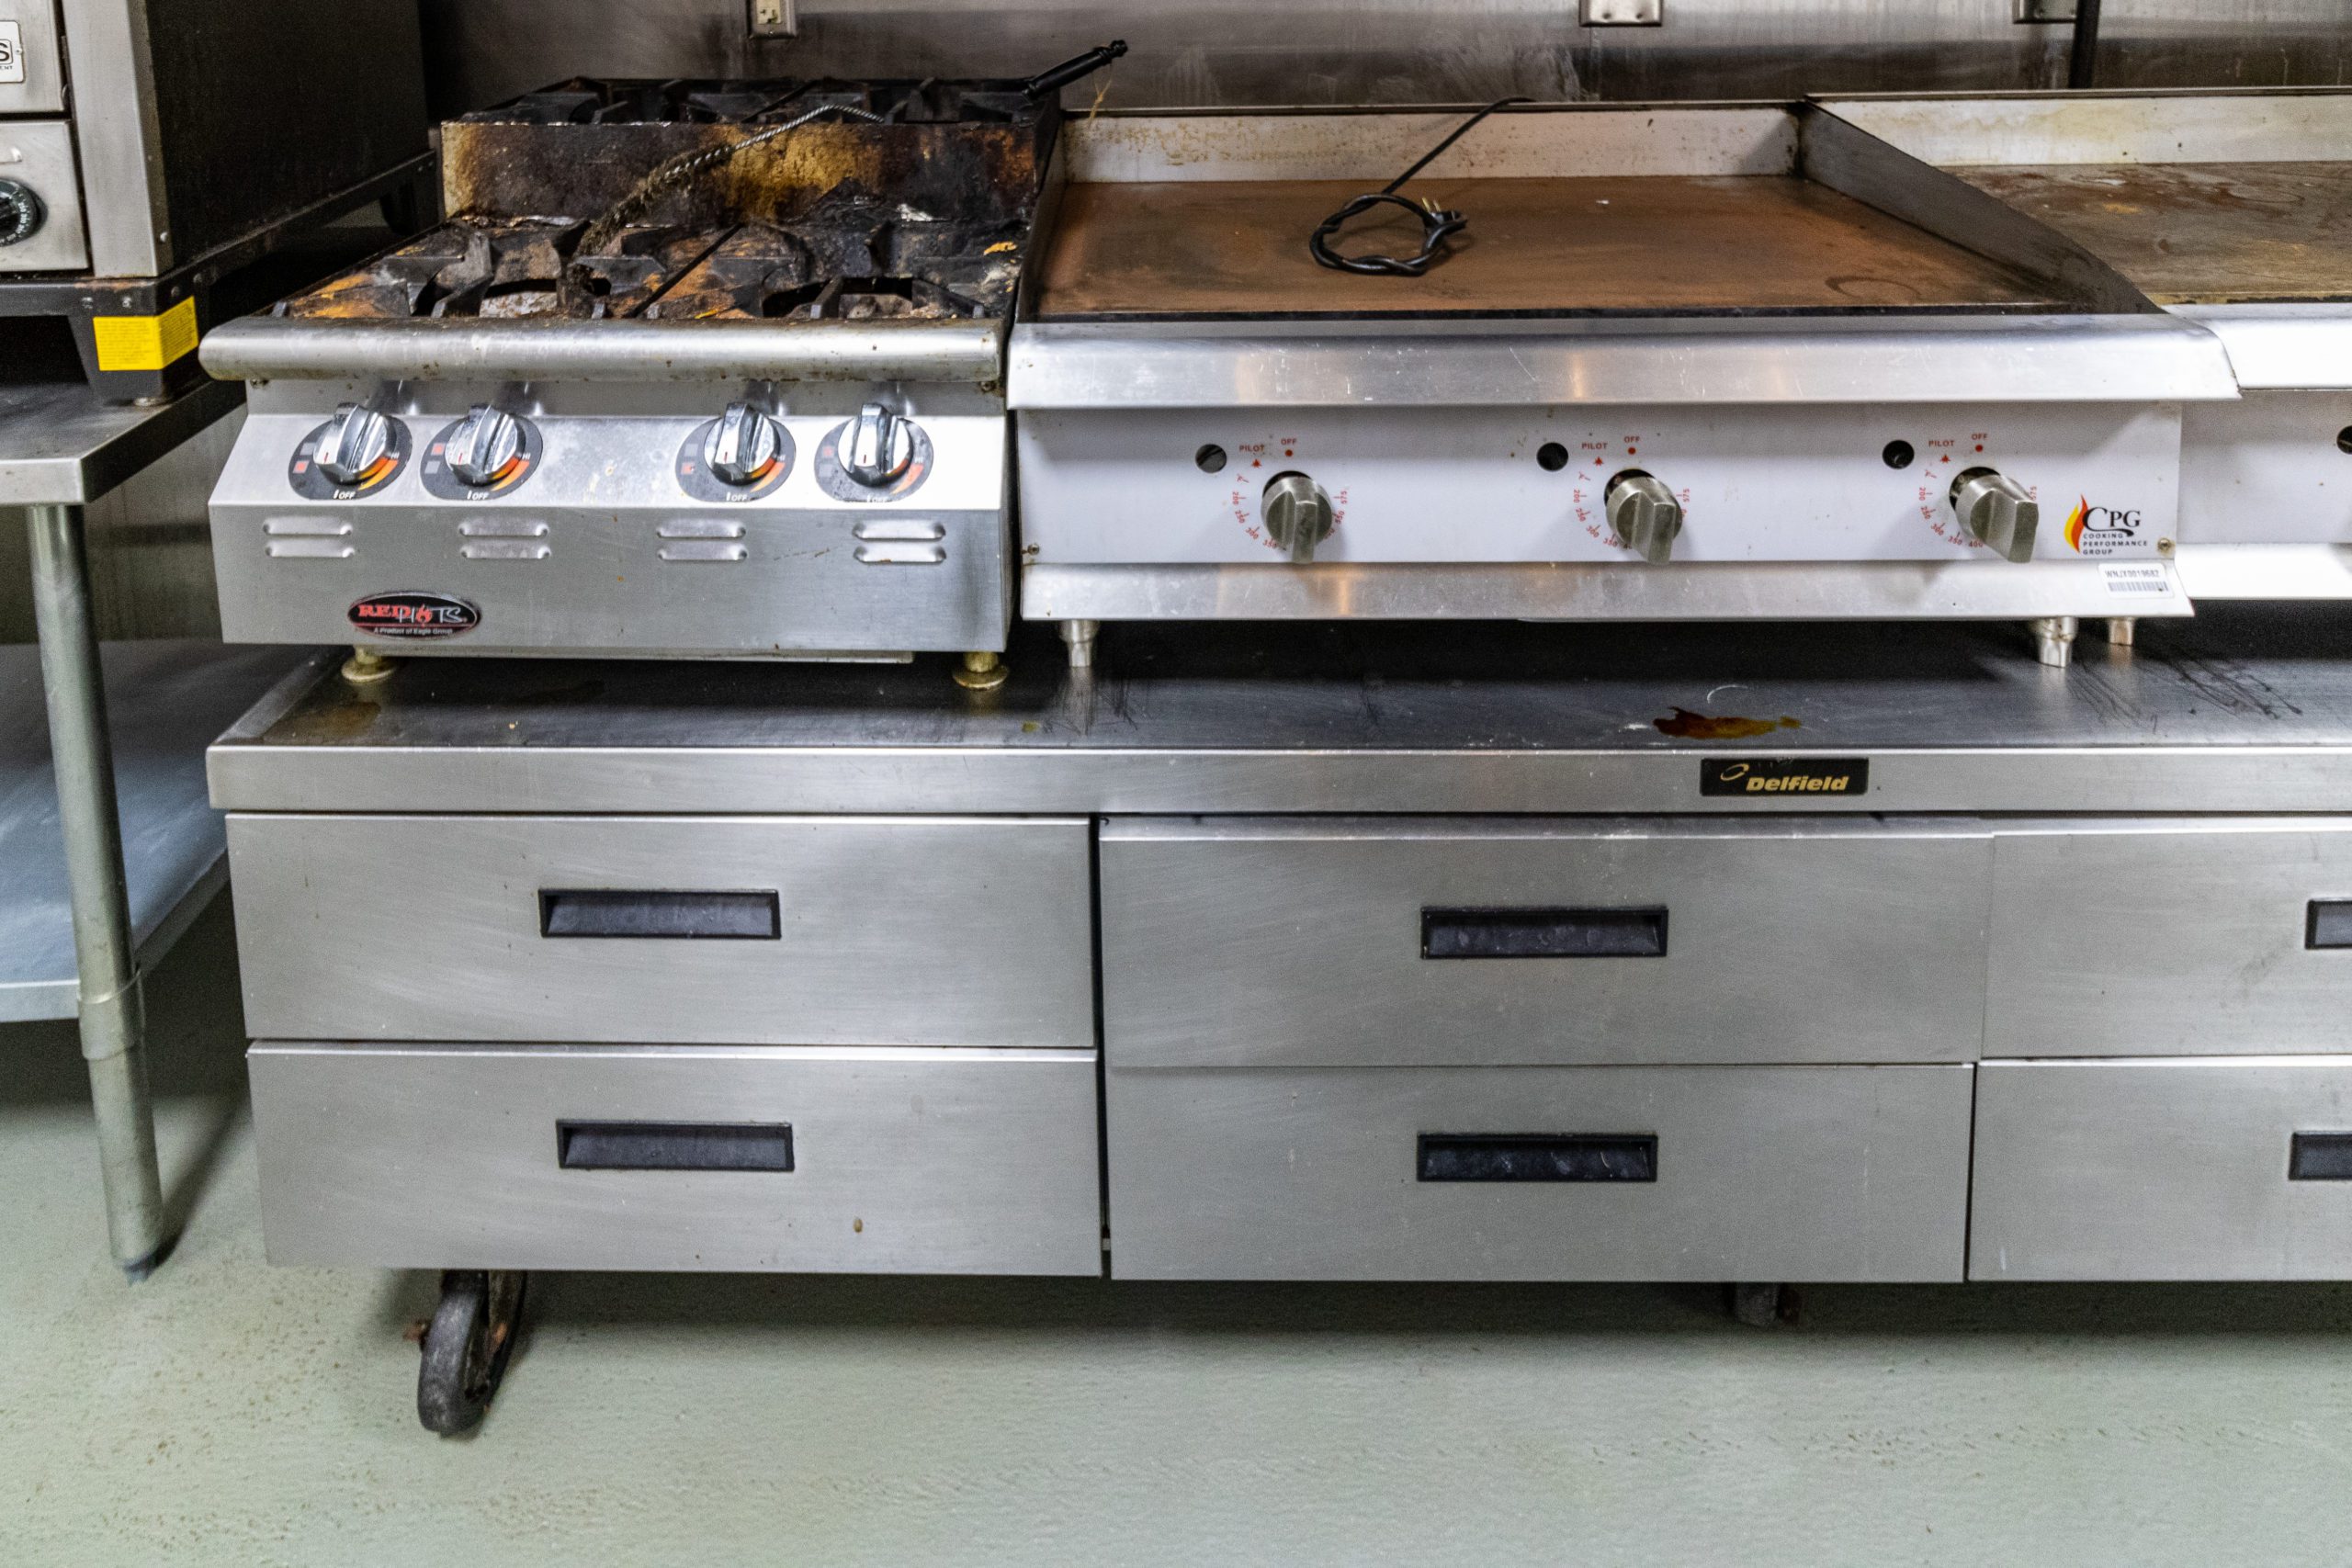 A commercial fryer & stovetop.